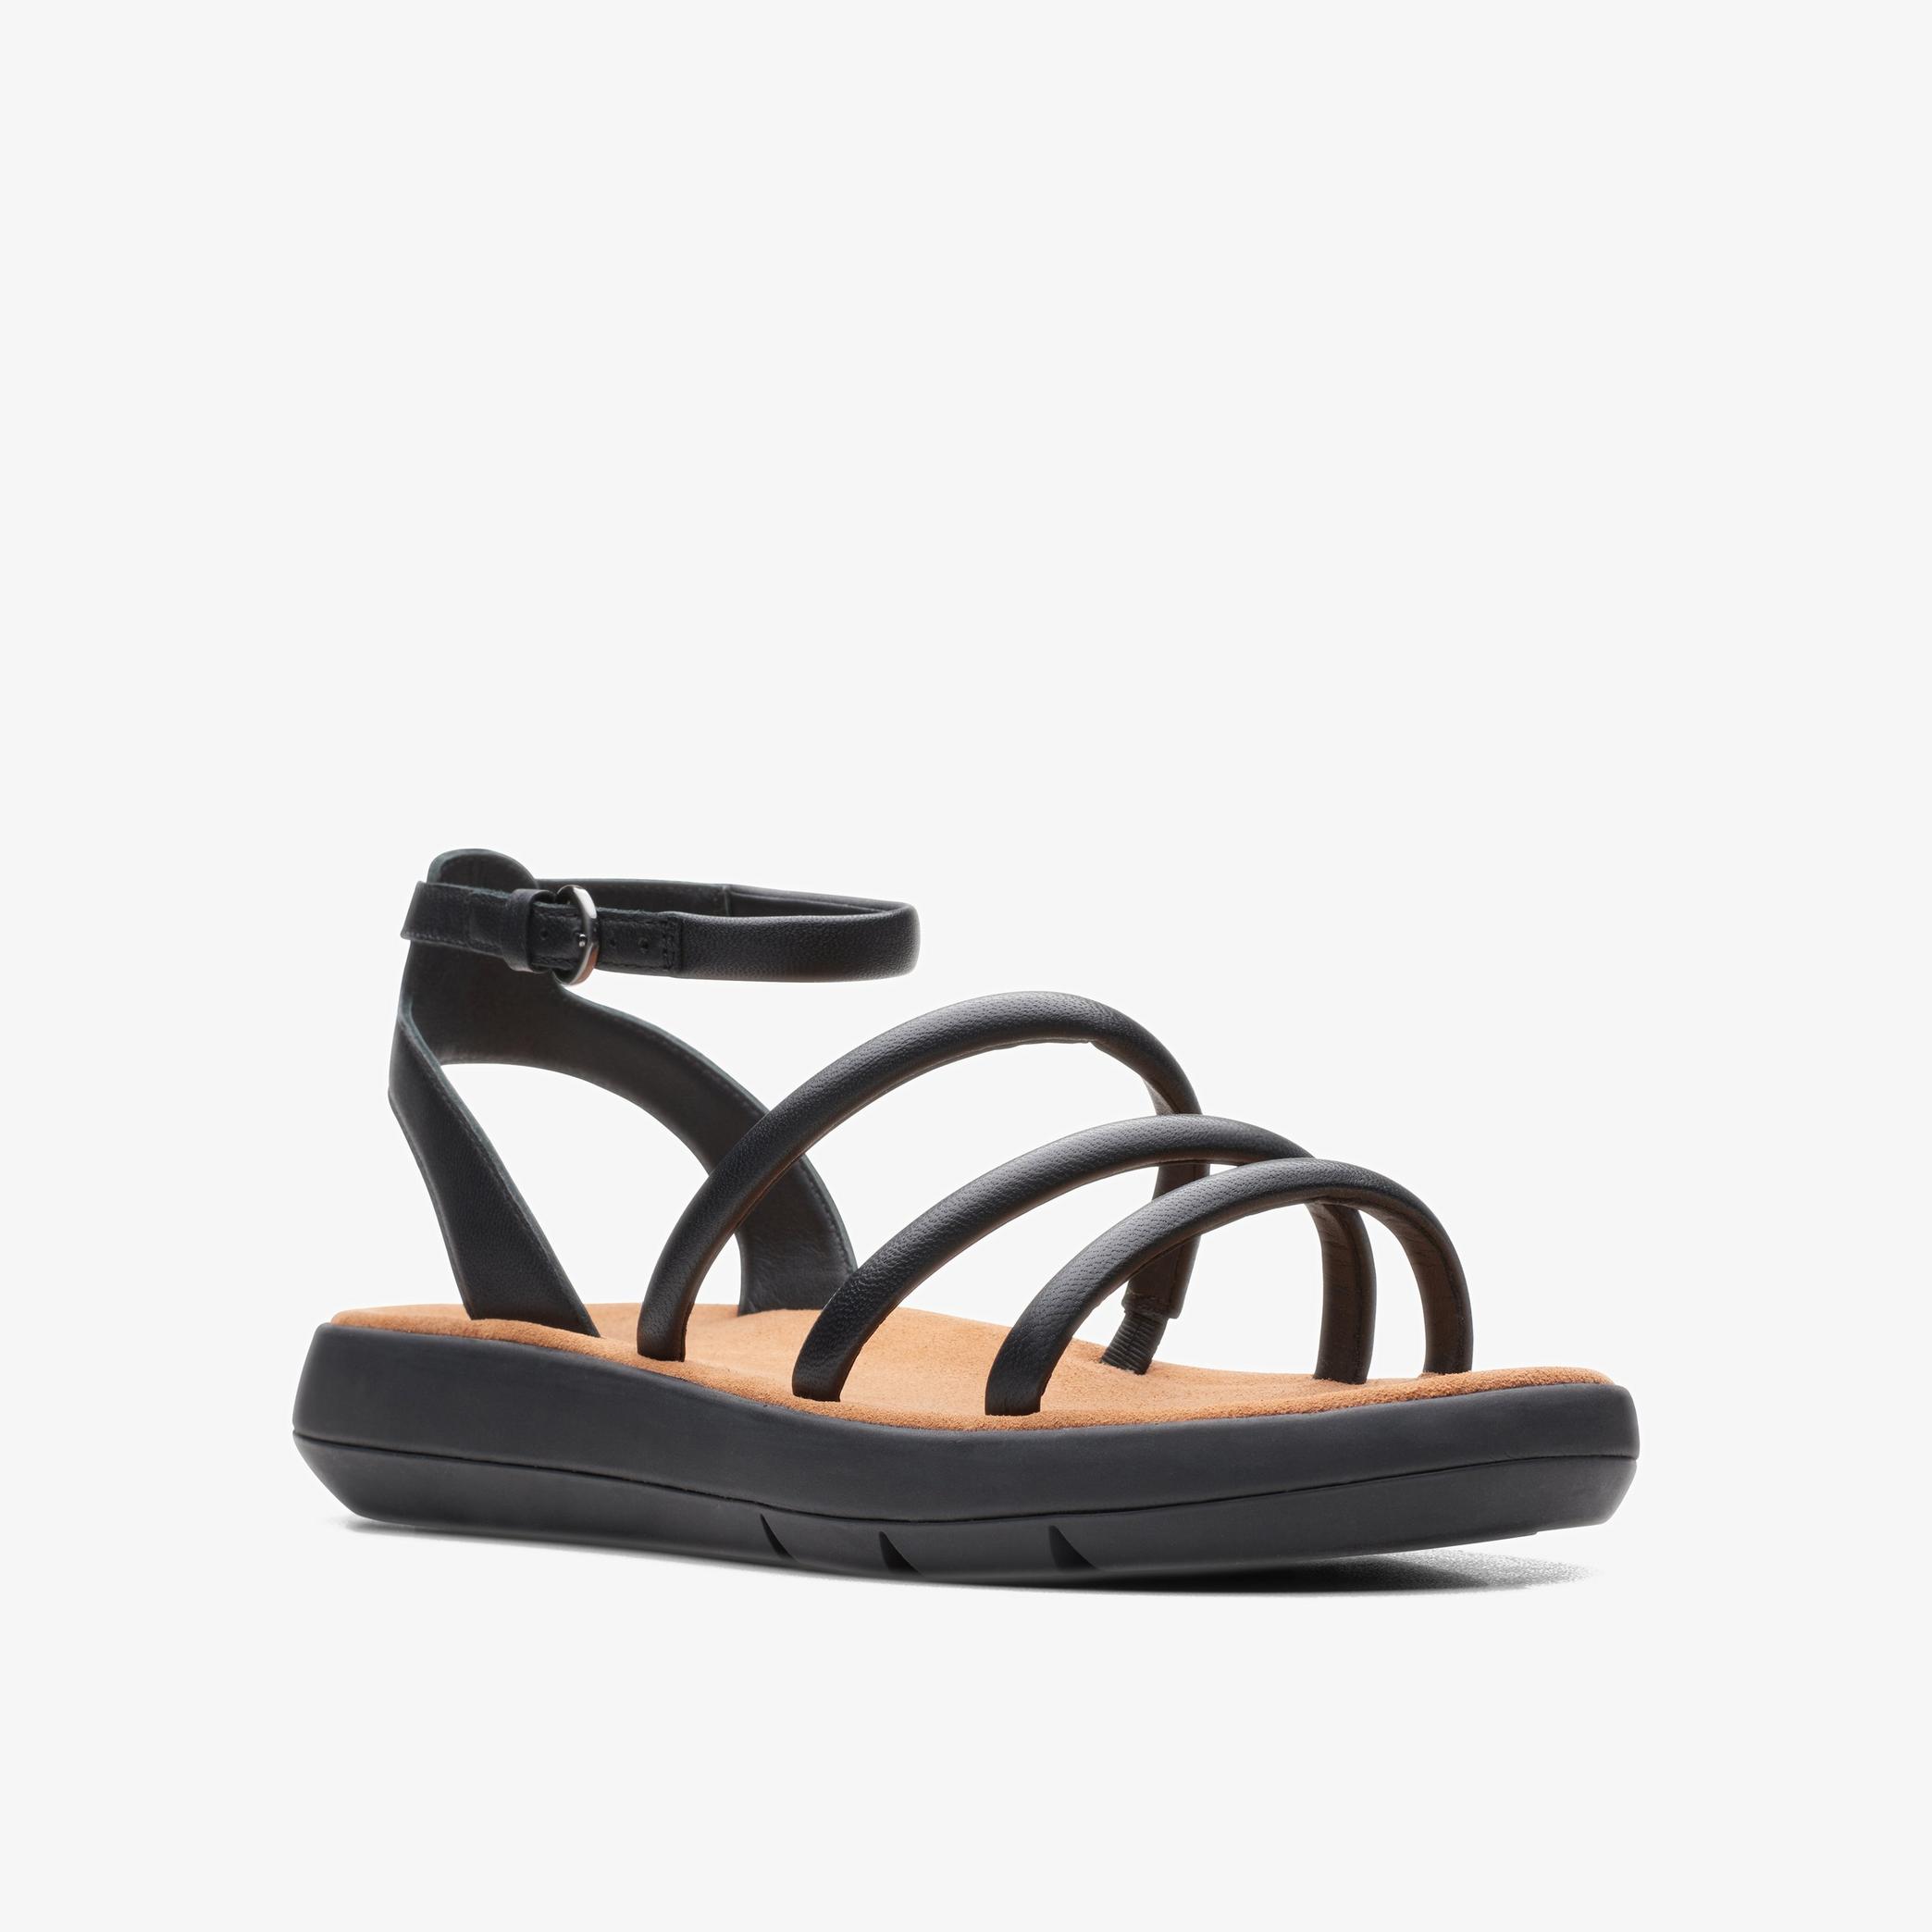 Jemsa Style Black Leather Flat Sandals, view 3 of 6